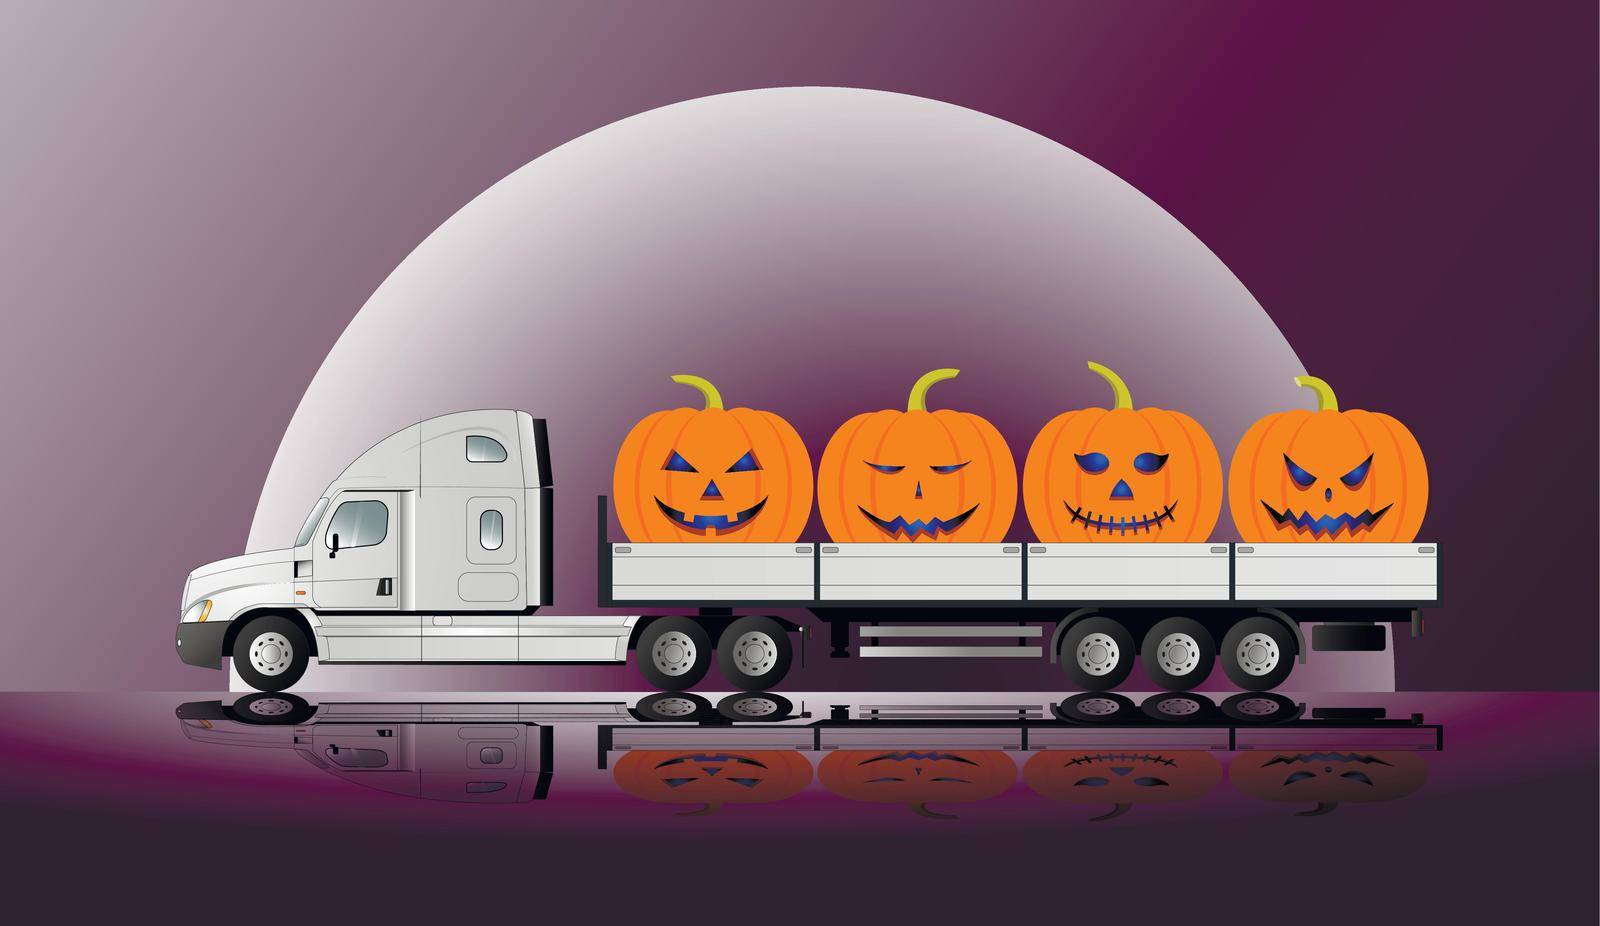 A modern American road train transporting Halloween pumpkins against the backdrop of a full moon. Reflection.